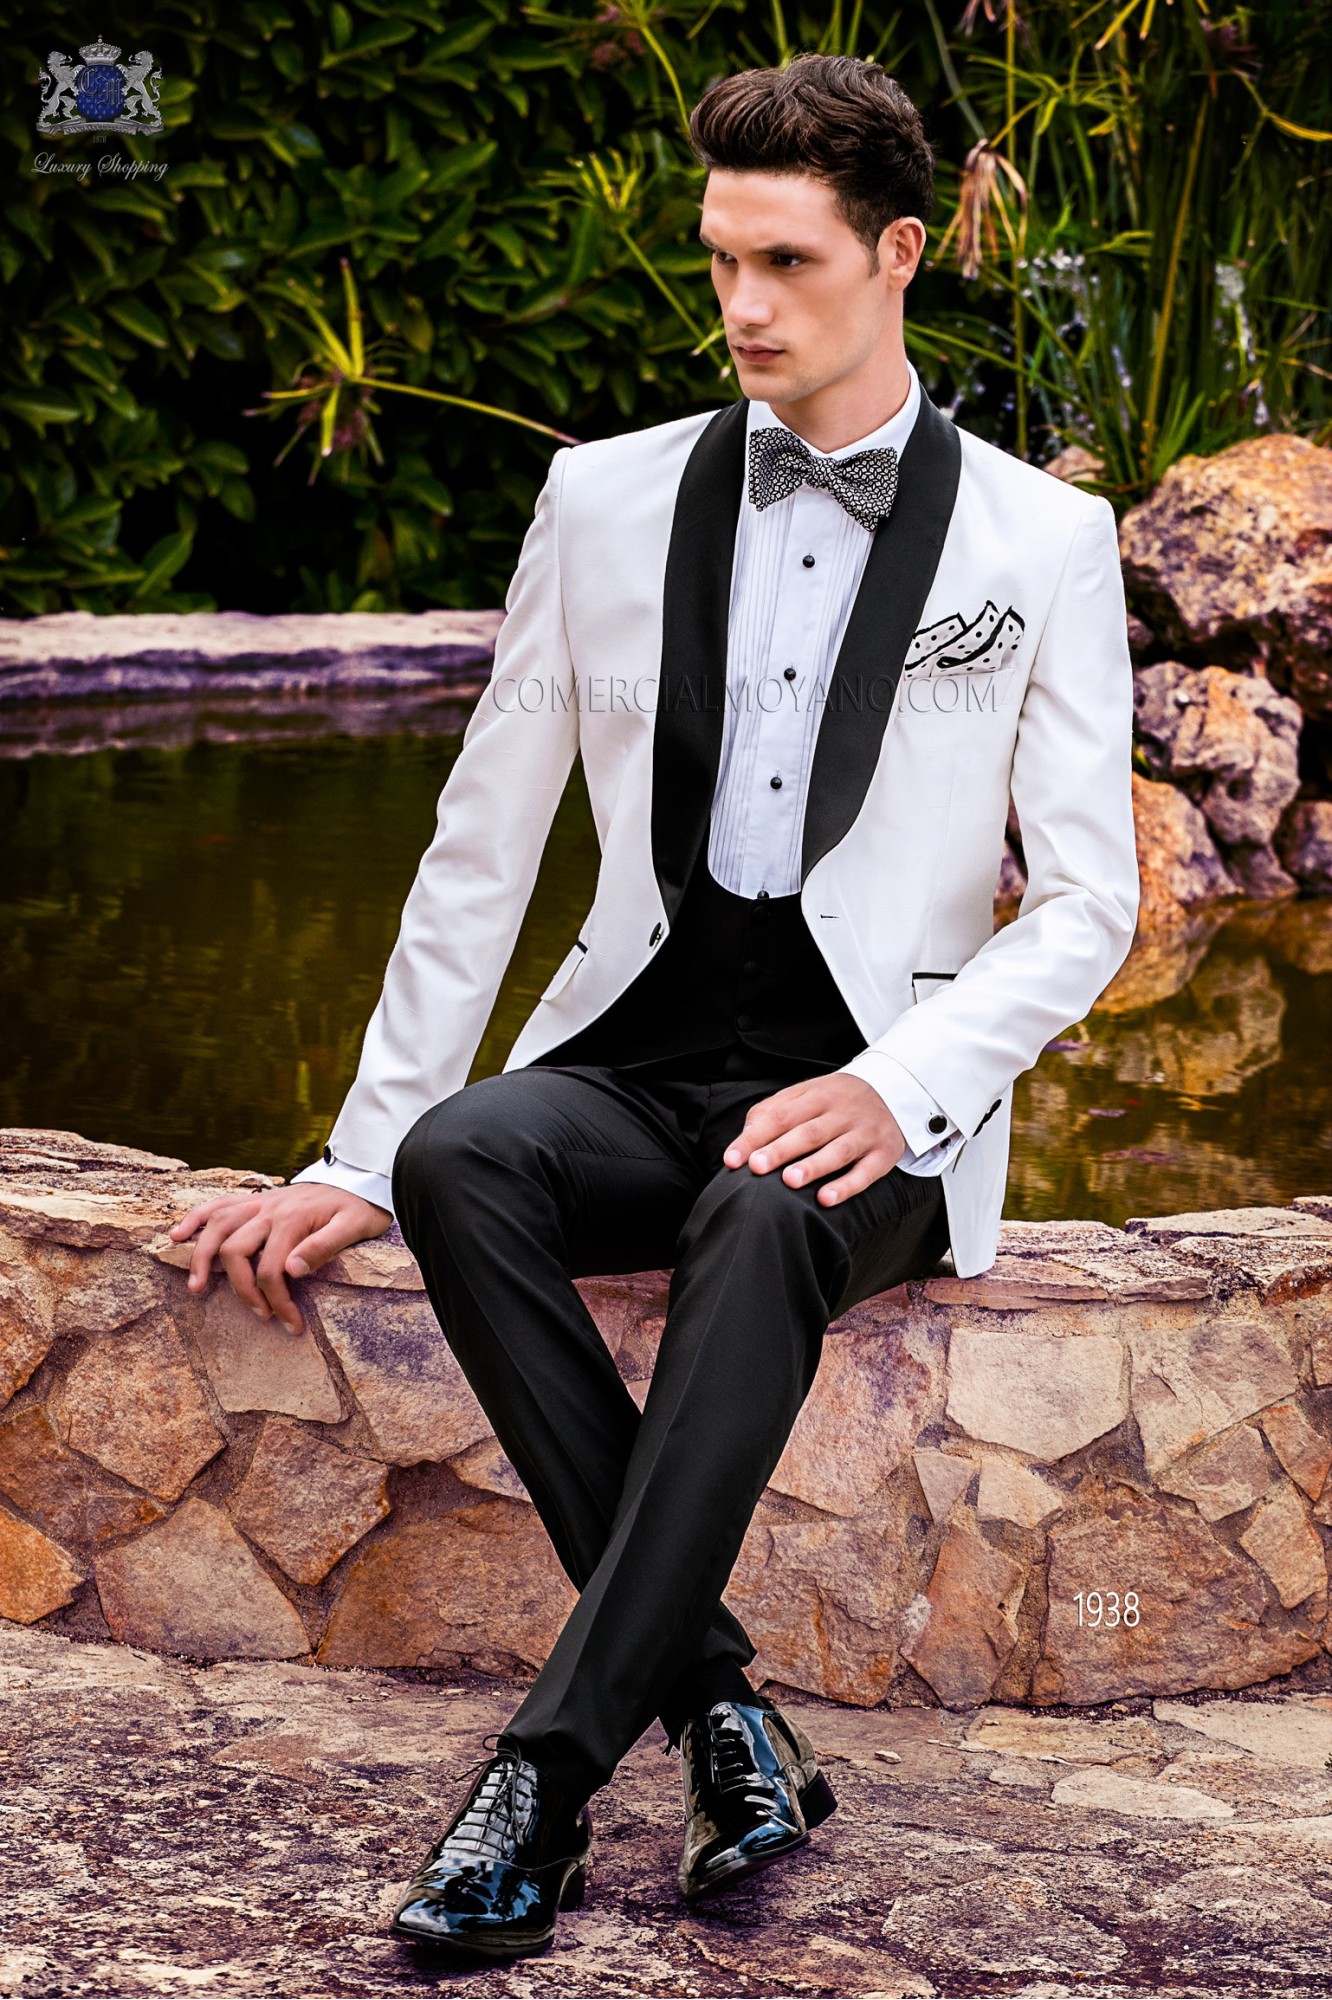 Bespoke black & white shantung dinner jacket combined with a black trousers